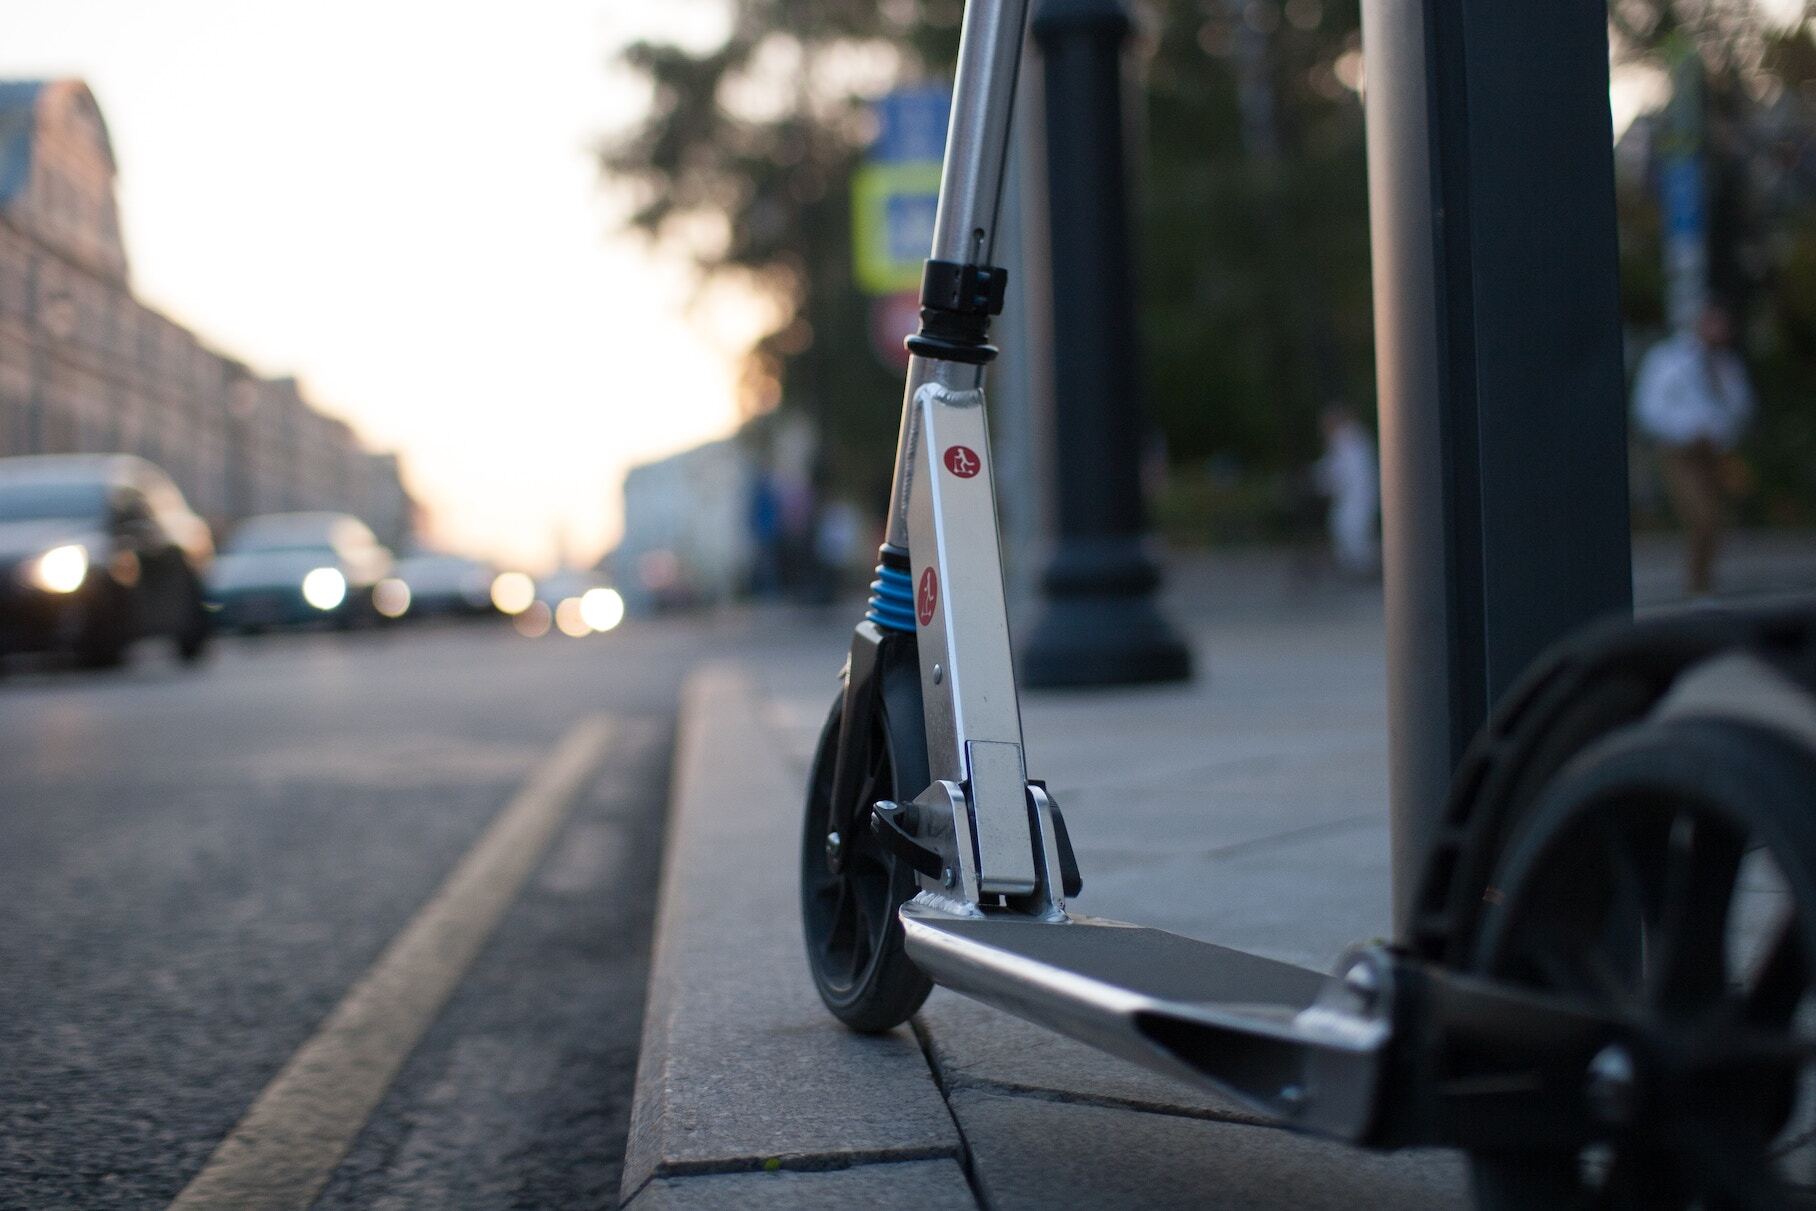 Residents of Russia will register electric scooters in the federal register